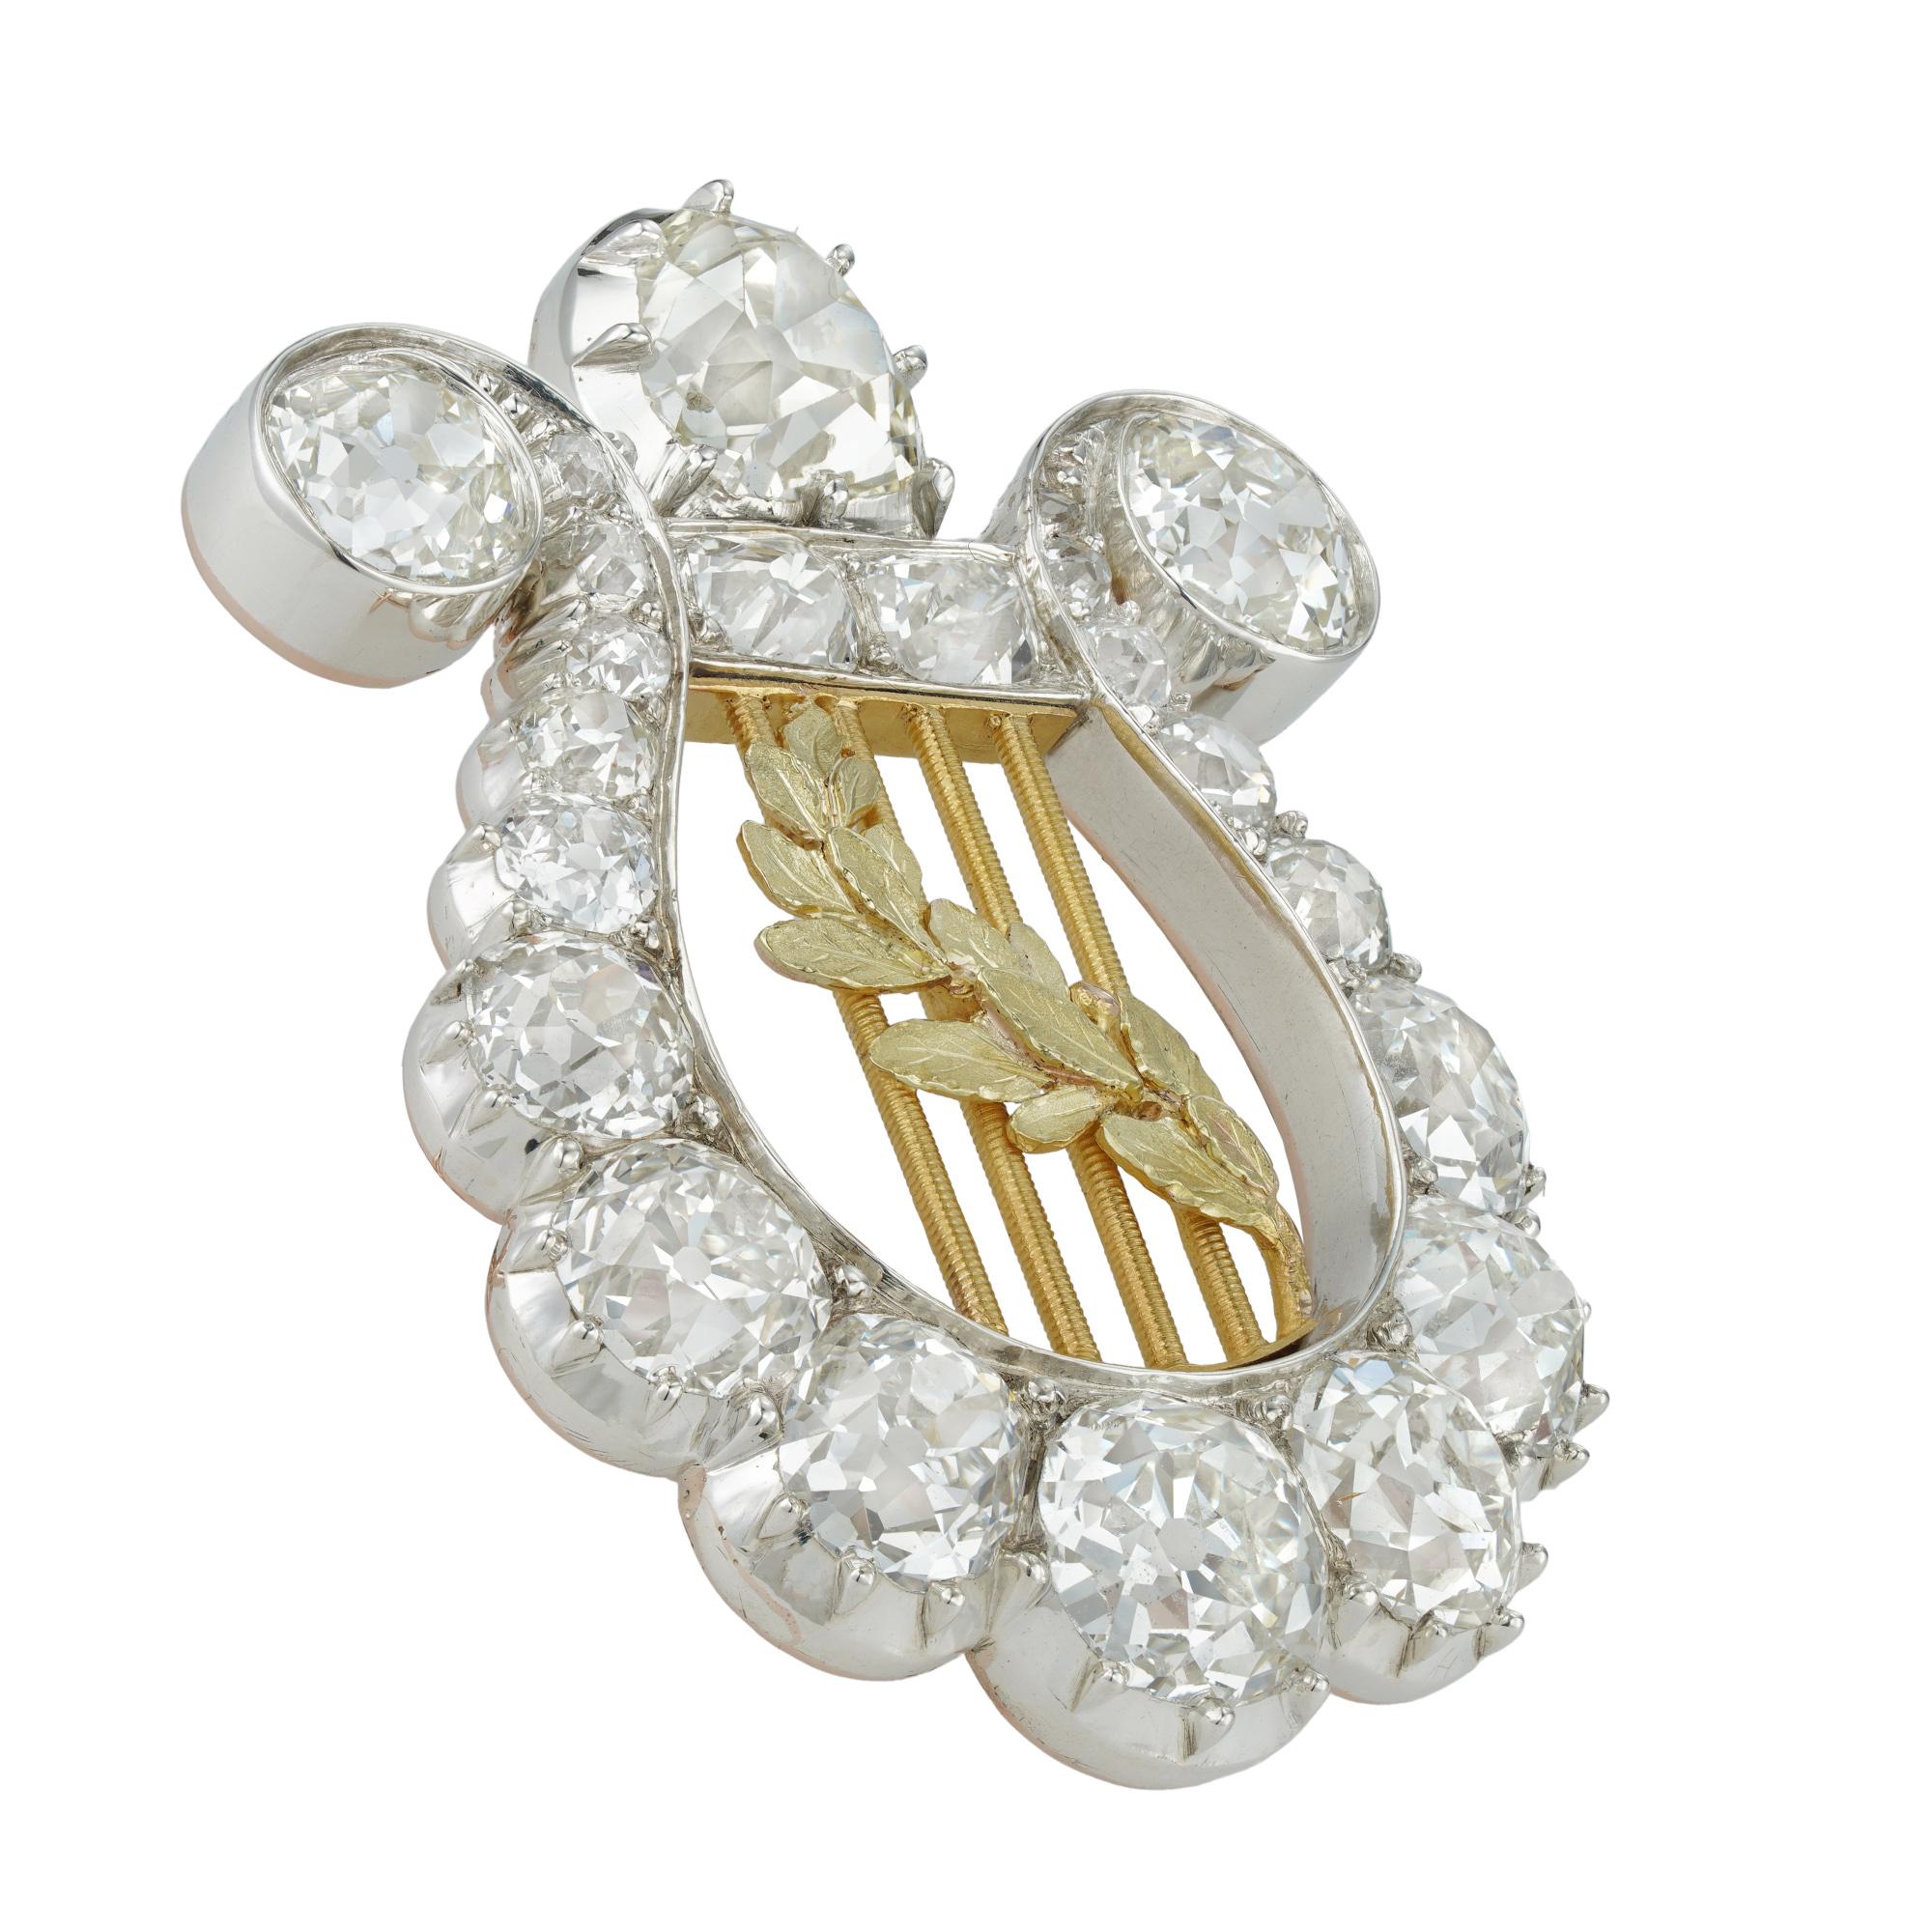 A Victorian diamond lyre brooch, set throughout with old brilliant-cut diamonds estimated to weigh a total of 7.2 carats, the centre with laurel leaf motif to gold strings, all set in silver to a yellow gold mount, circa 1880, gross weight 7.61